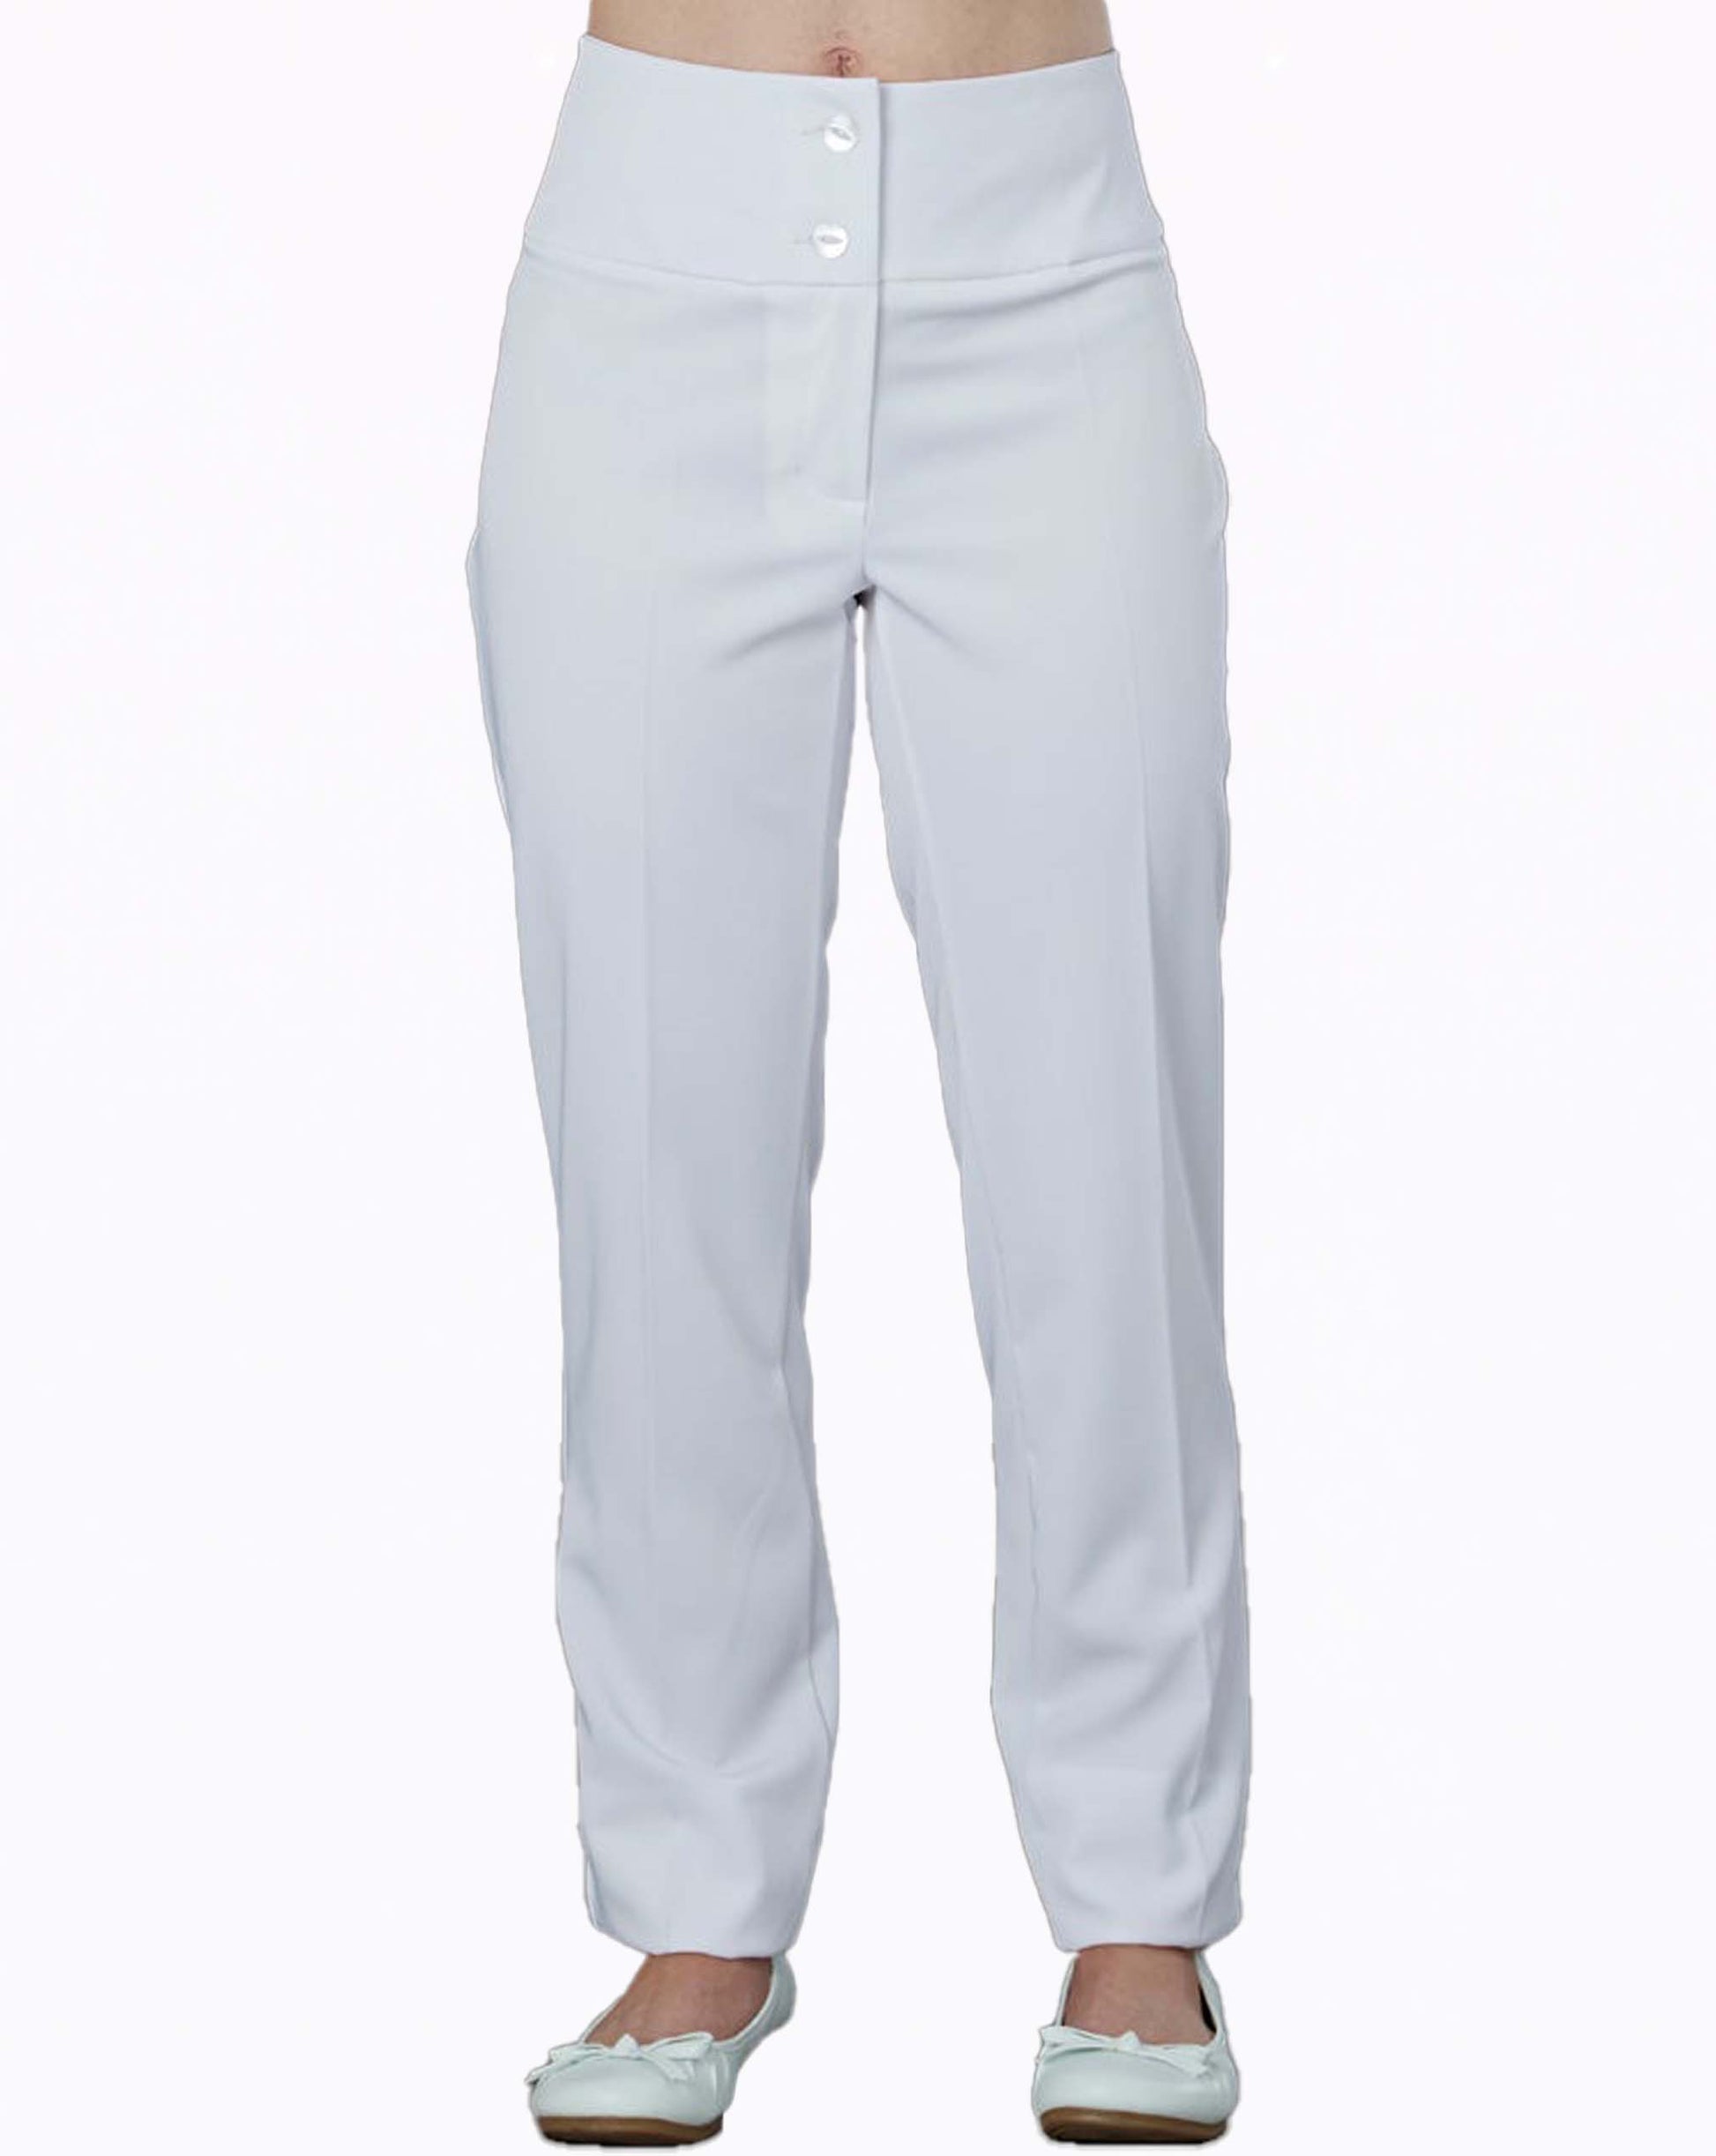 skinny fit white trousers women